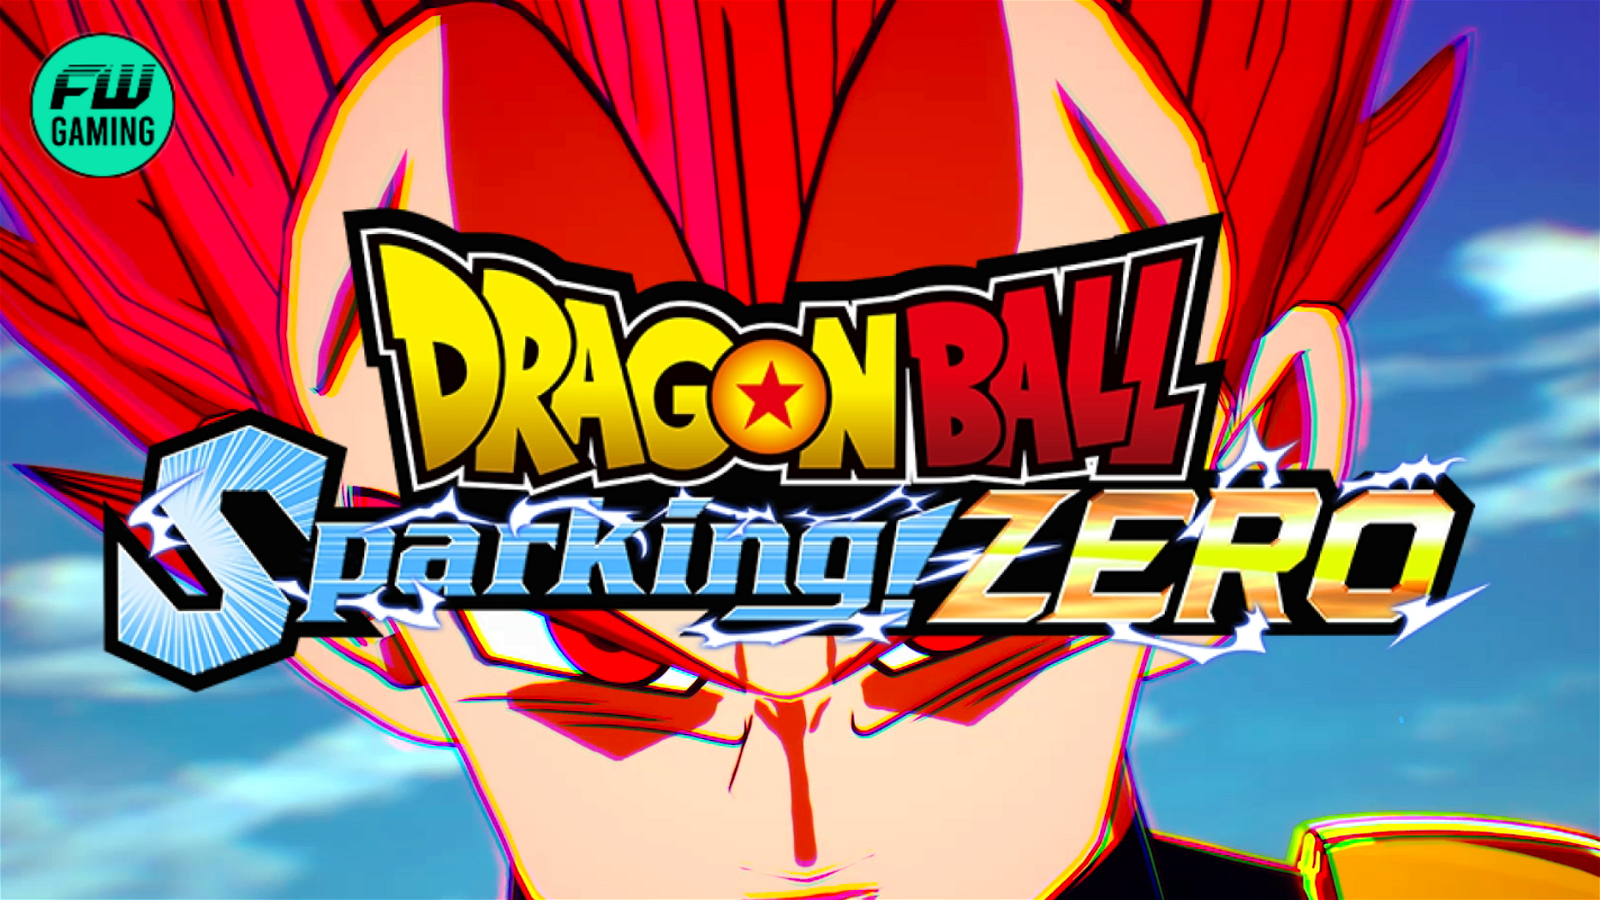 “Hype hype hype!!”: Fans Are Losing Their Minds Over Latest Dragon Ball: Sparking Zero Drop